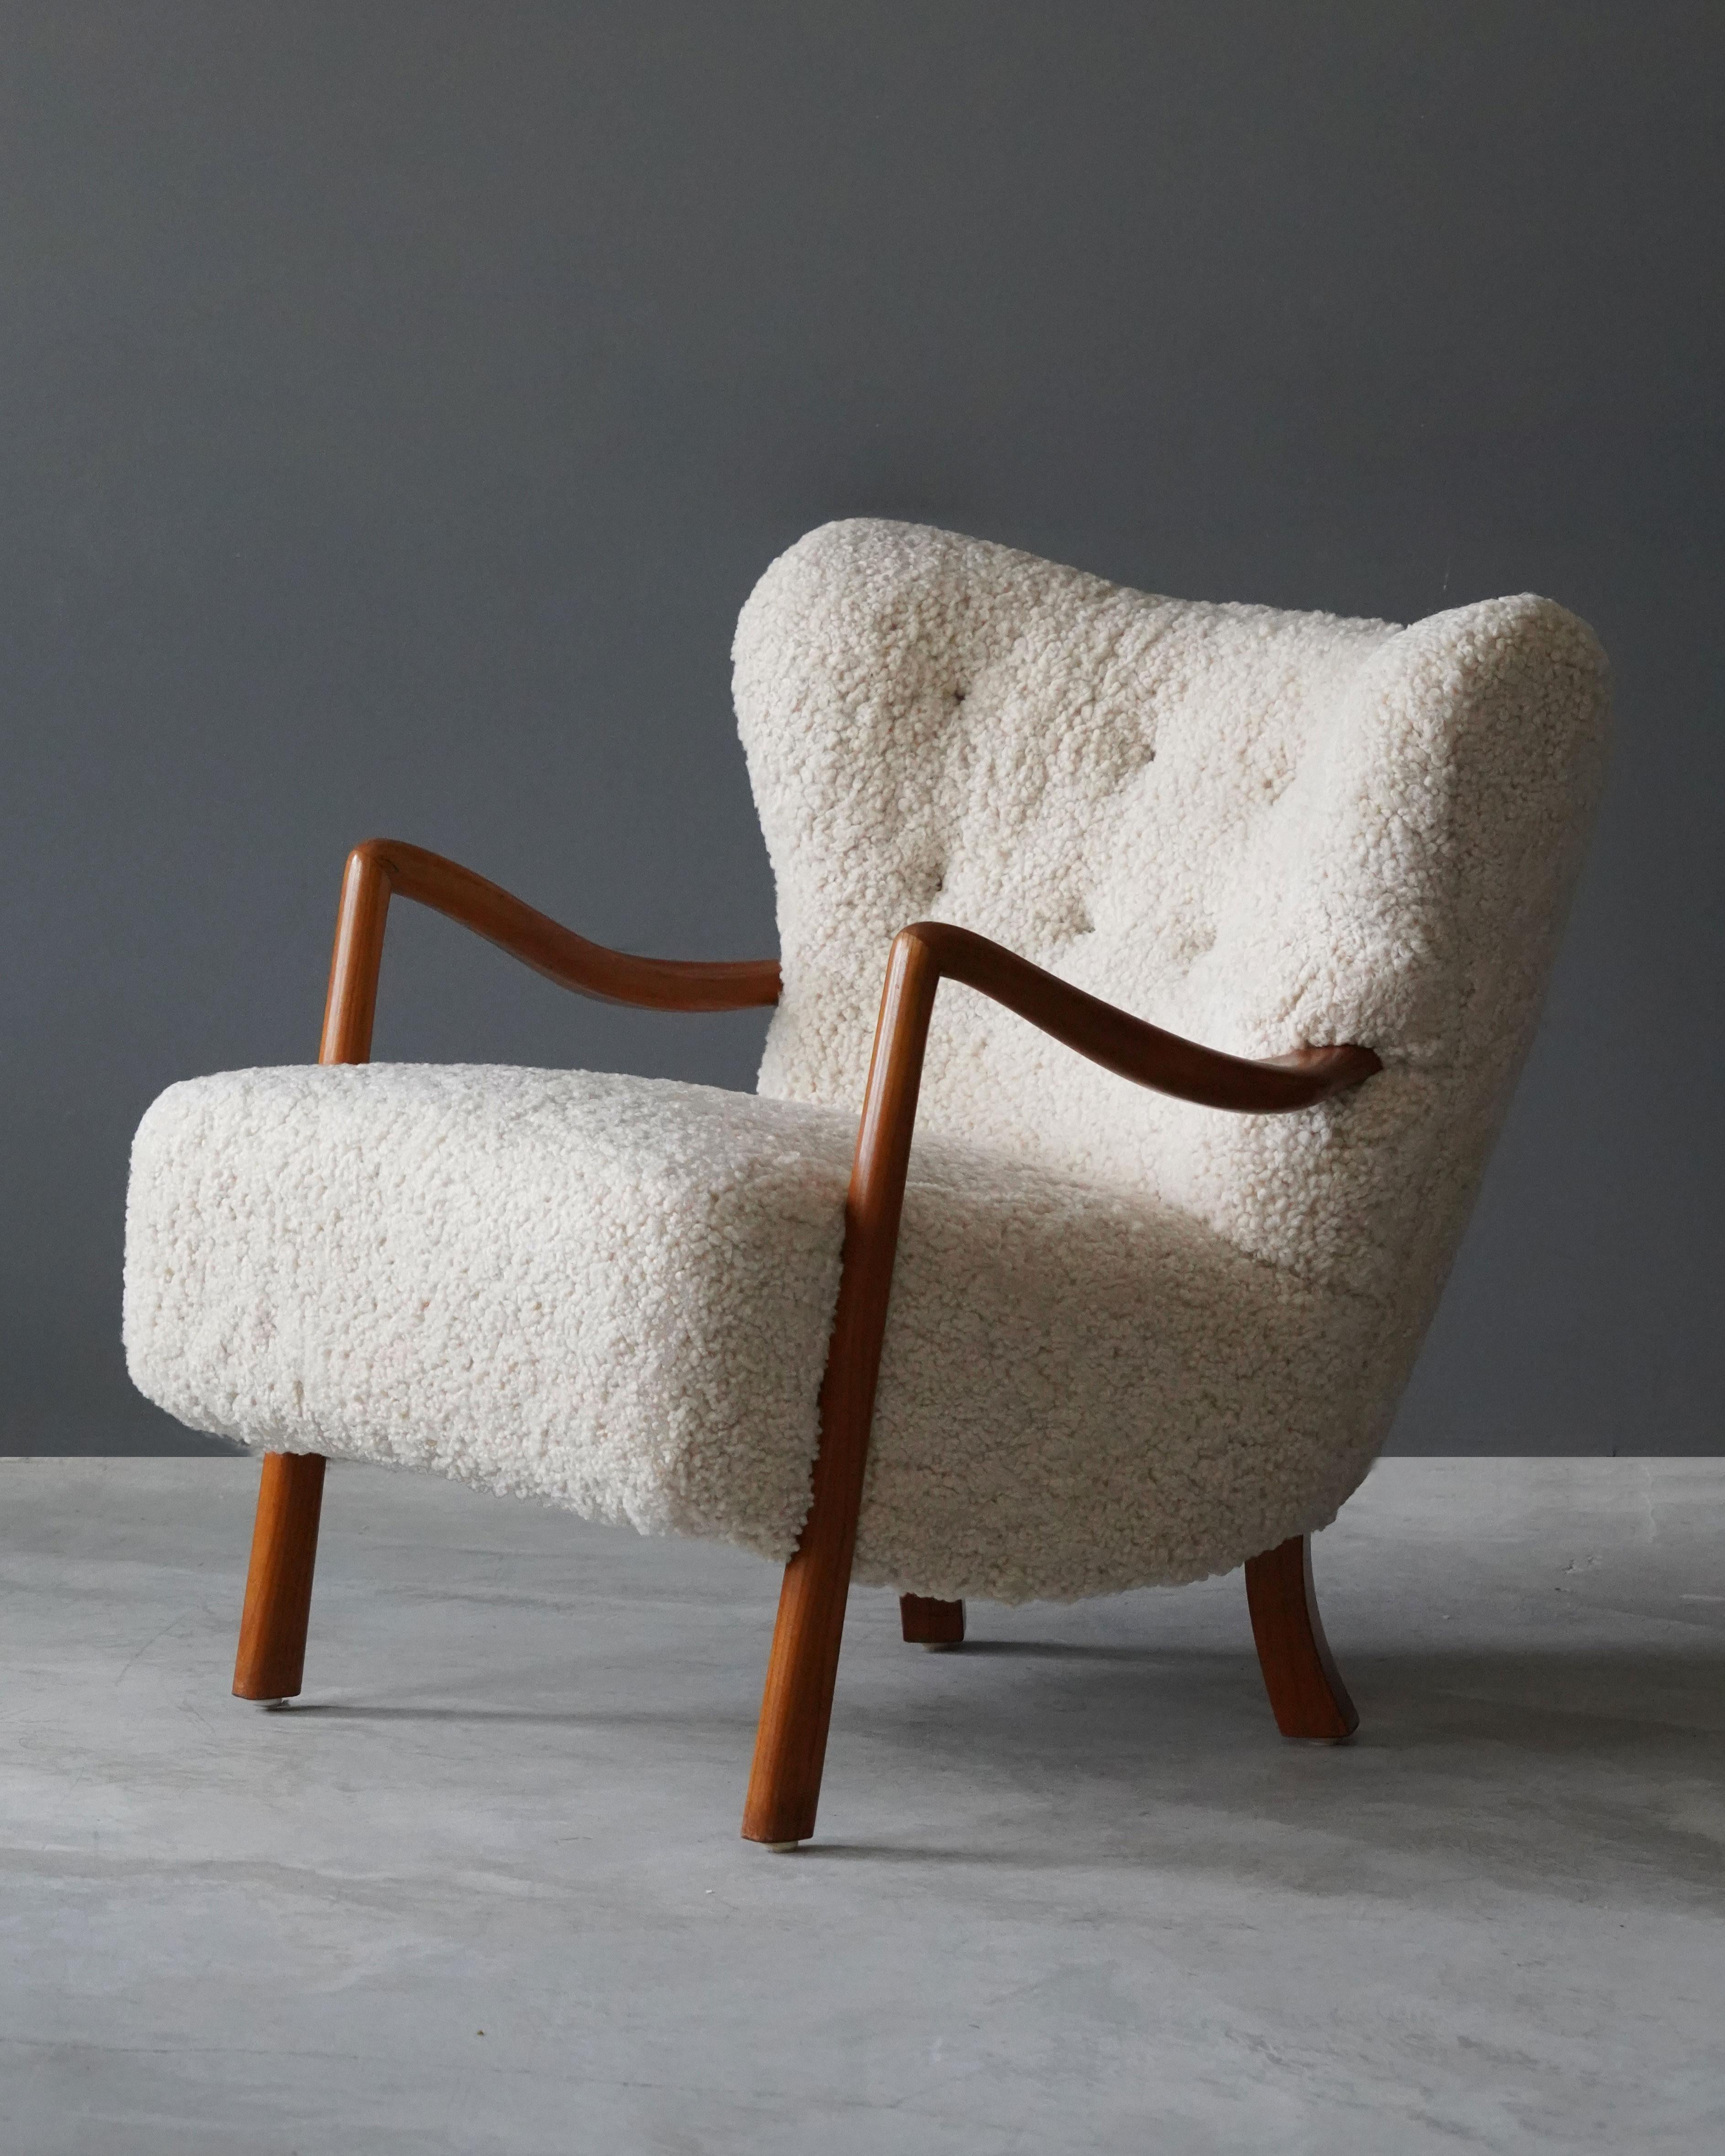 An organic lounge chair attributed to Viggo Boesen. The overstuffed form is contrasted by stained beech arms and legs. 

Other designers working in the organic style include: Peder Moos, Flemming Lassen, Jean Royère, Gio Ponti and Philip Arctander.